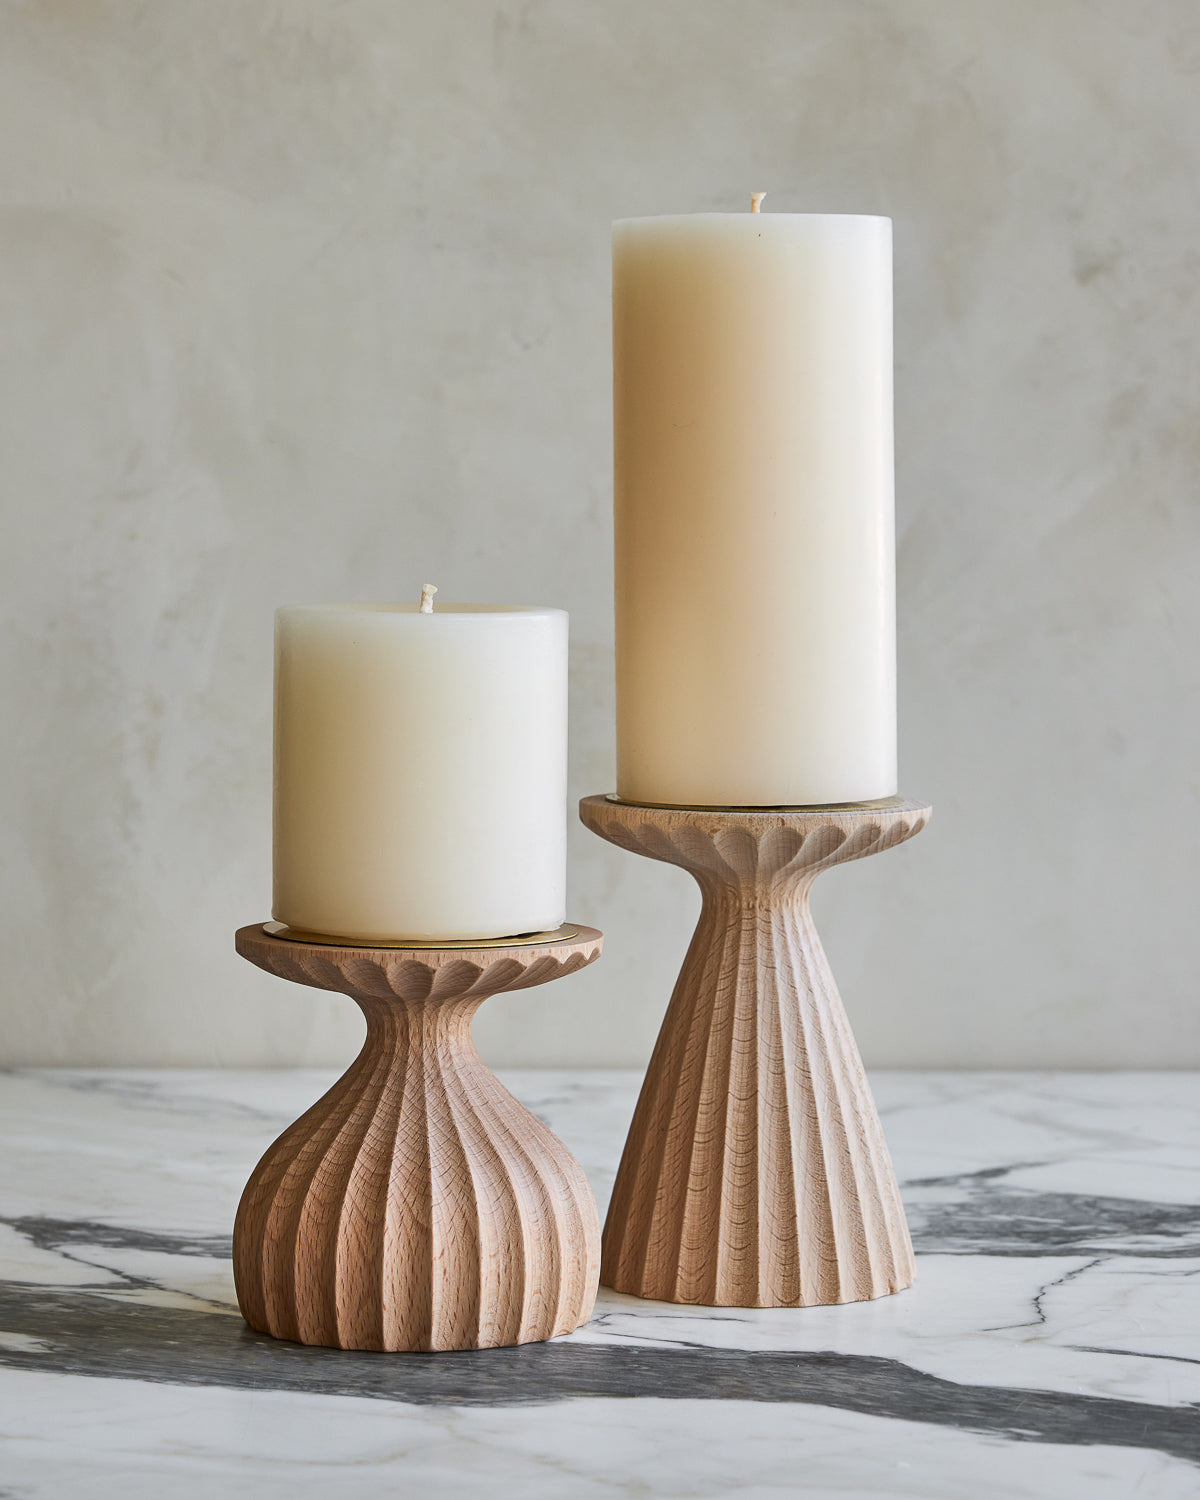 Pair of delicately grooved pillar candle holders in natural maple wood with shell white pillar candles